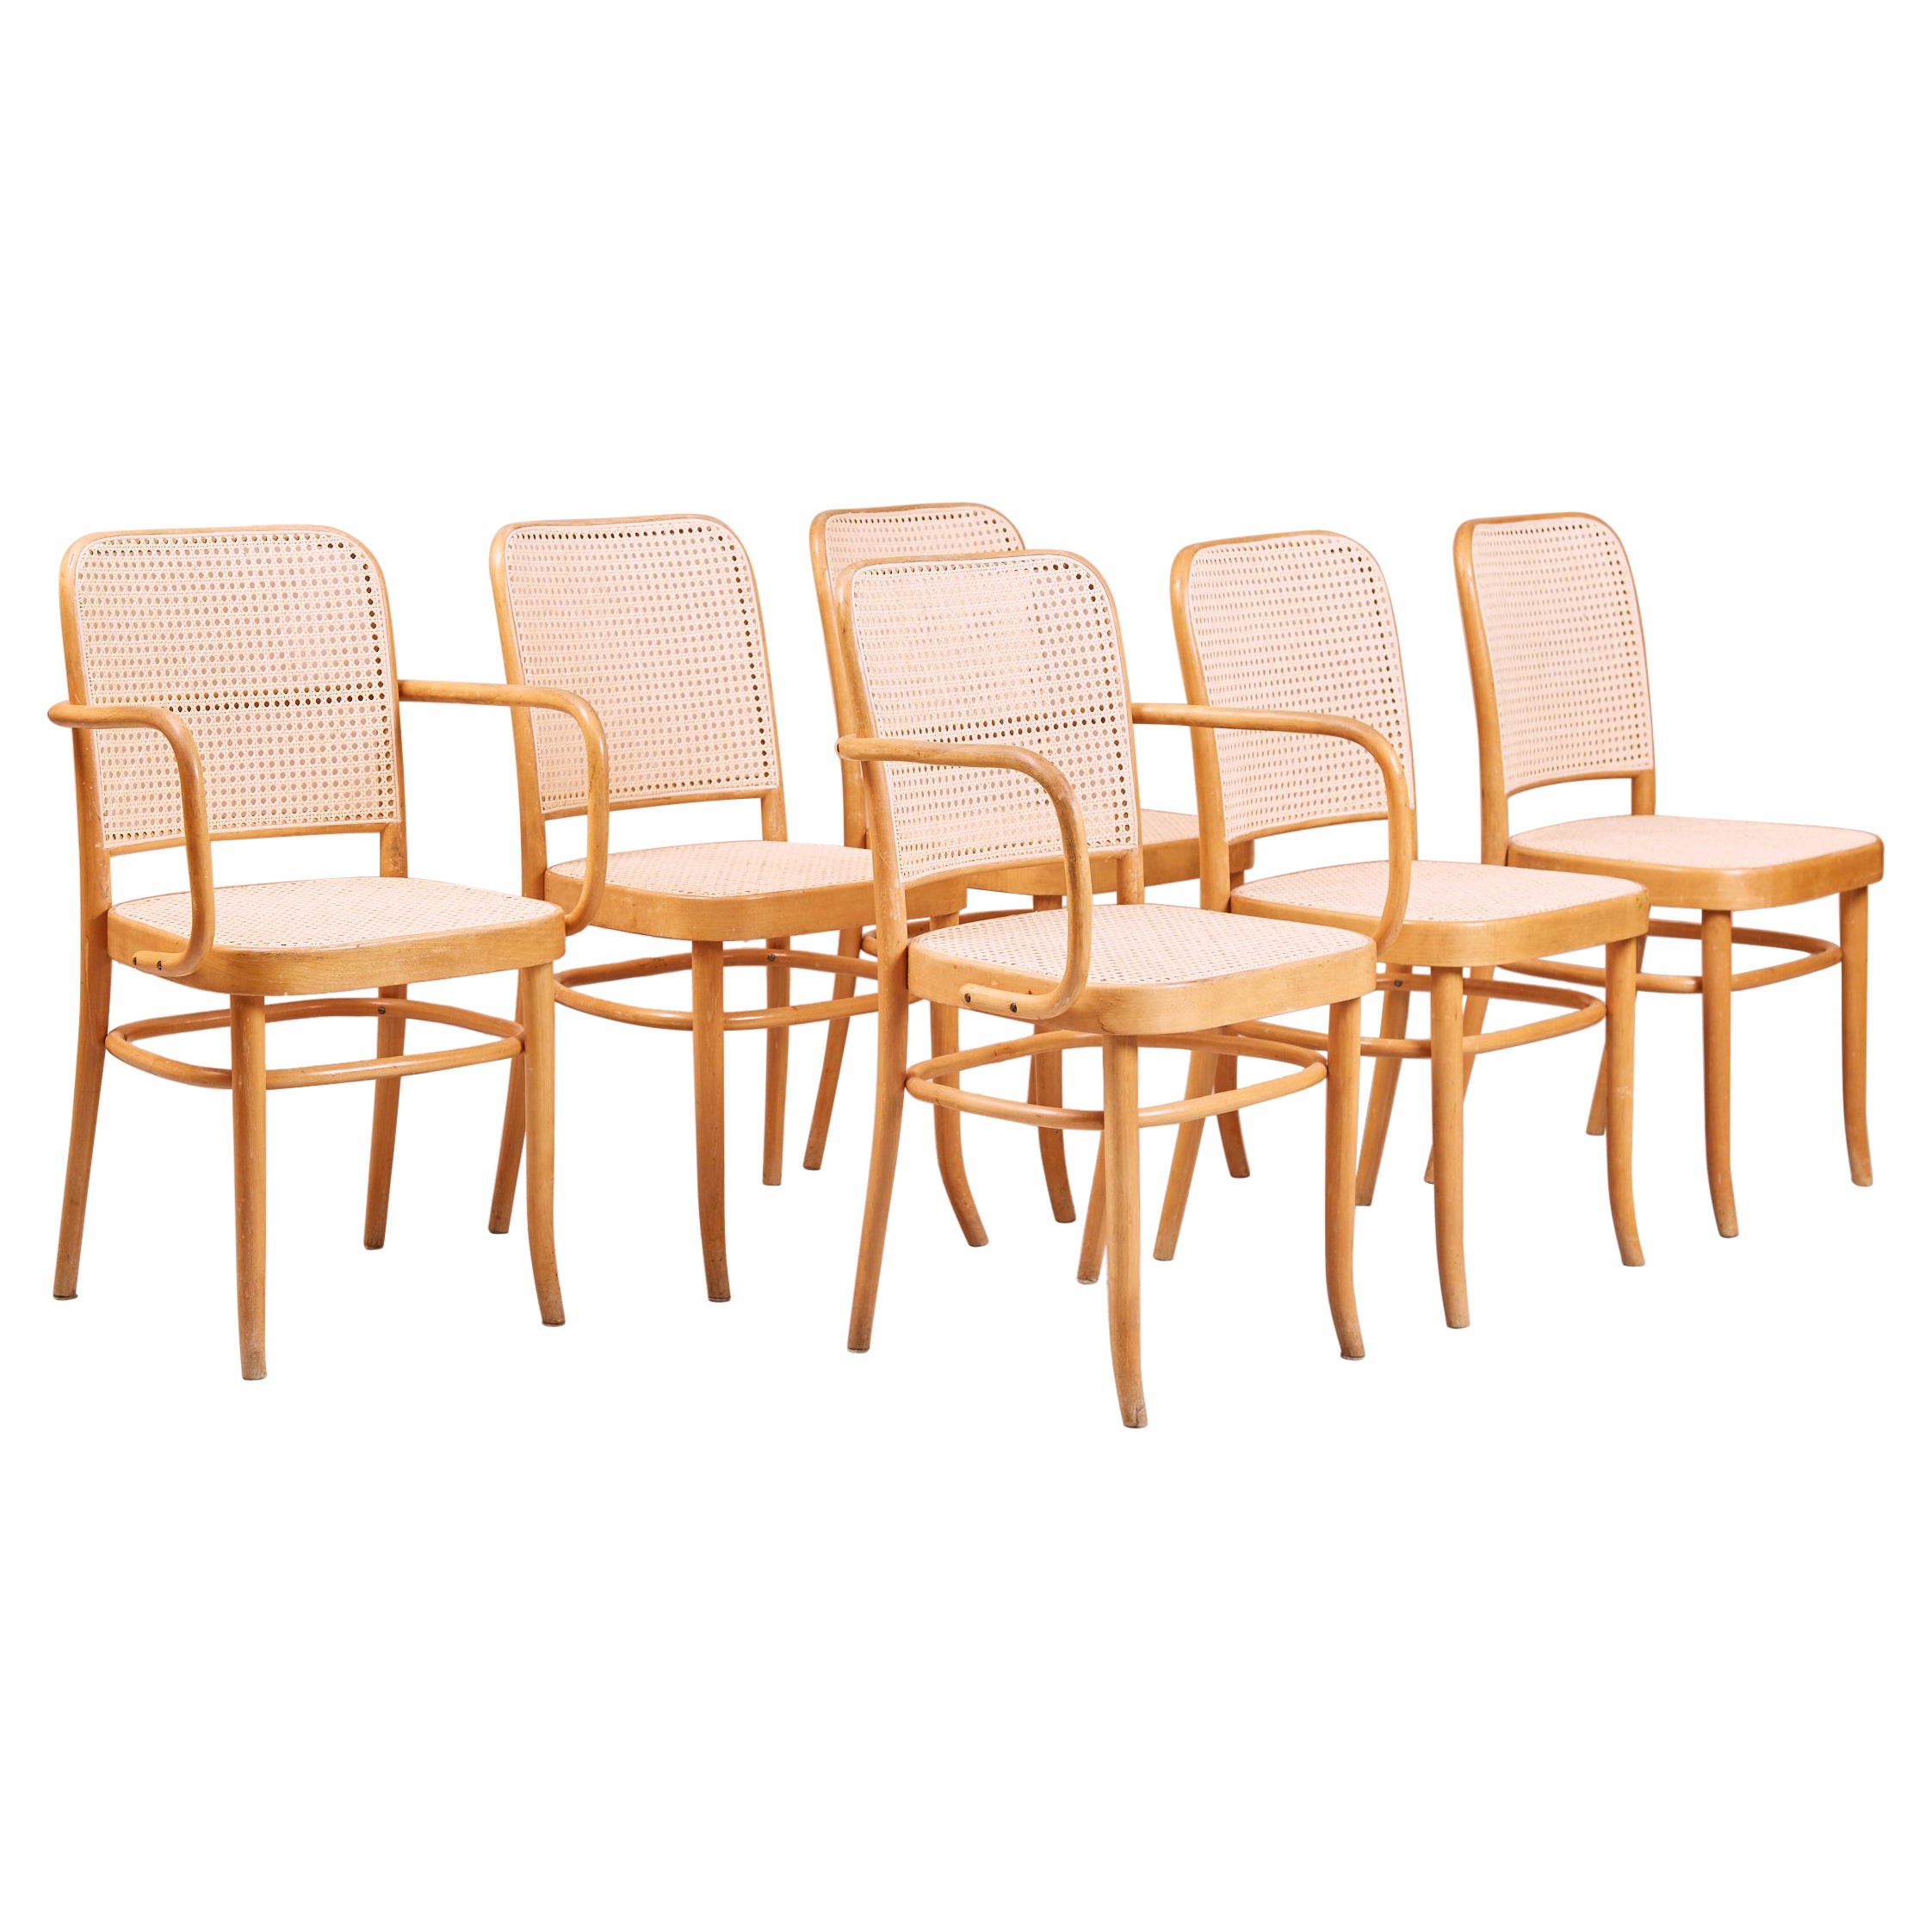 Prague Chairs by Josef Hoffmann & Frank in Bentwood and Cane, Set of Six, 1930s For Sale